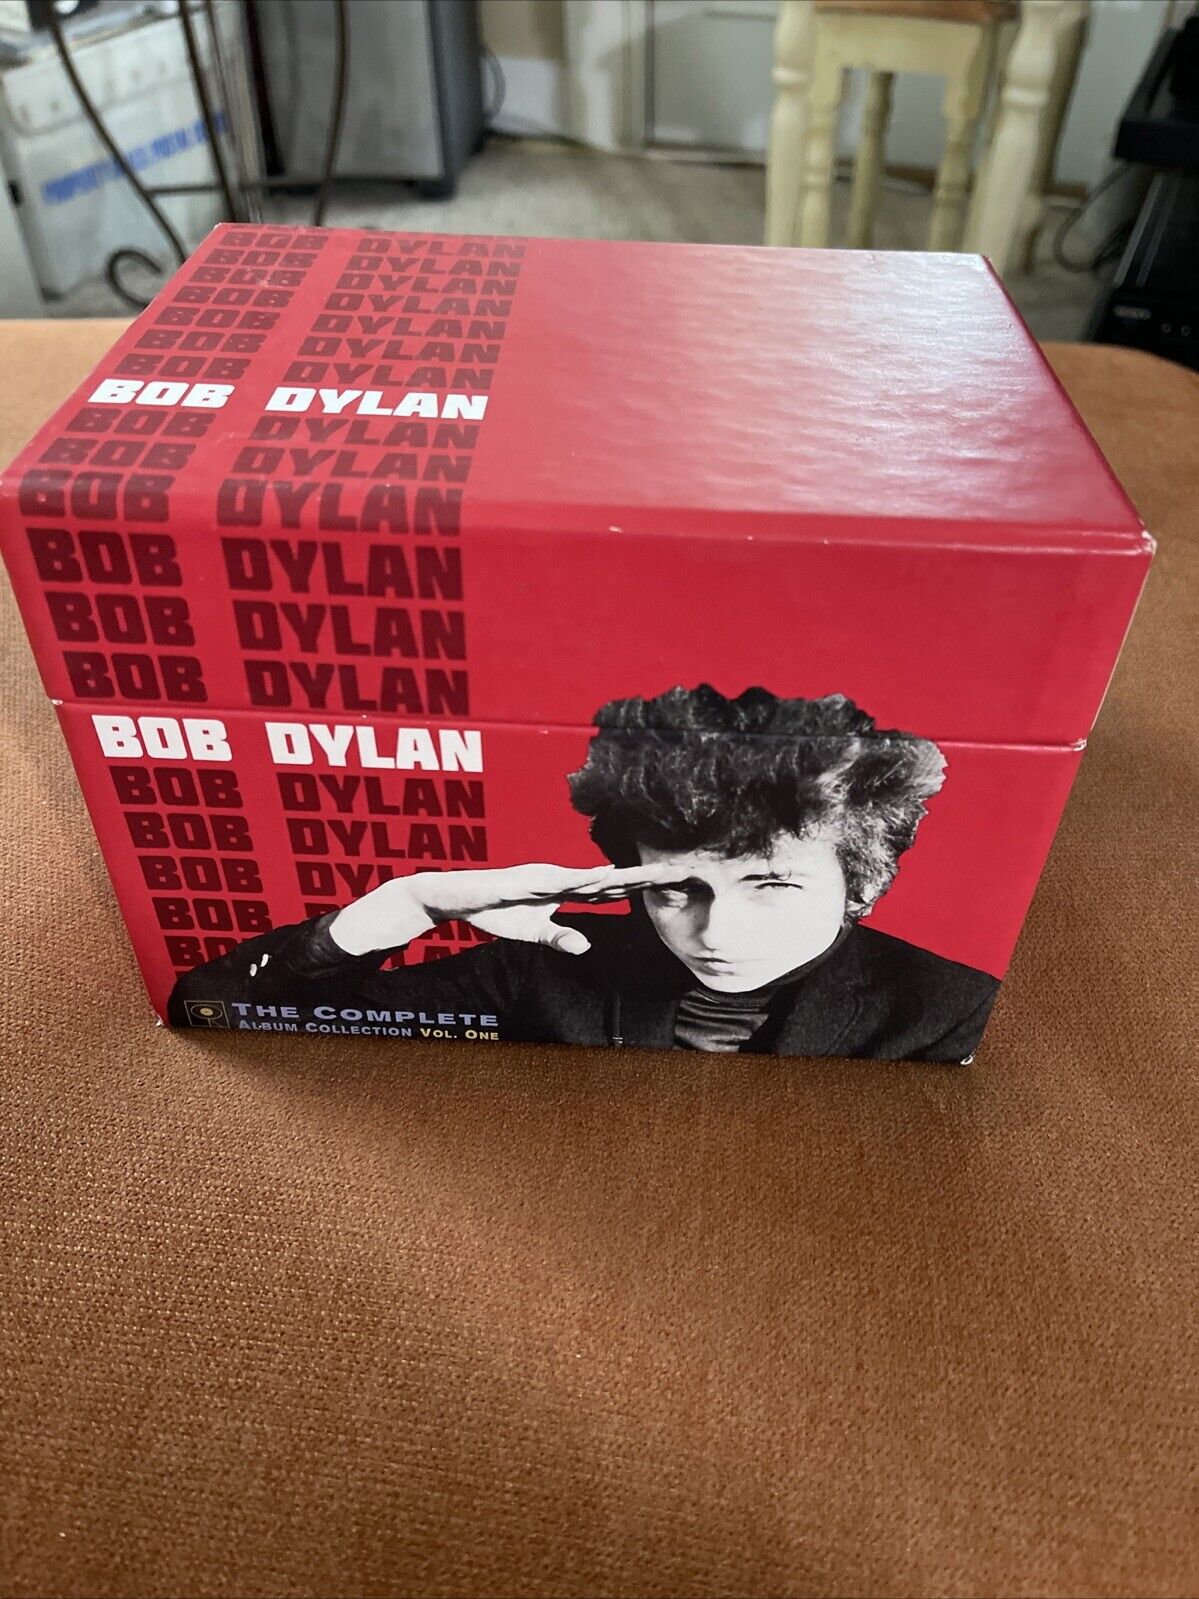 Bob Dylan The Complete Album Collection Vol. One Missing Disc Two Basement Tapes